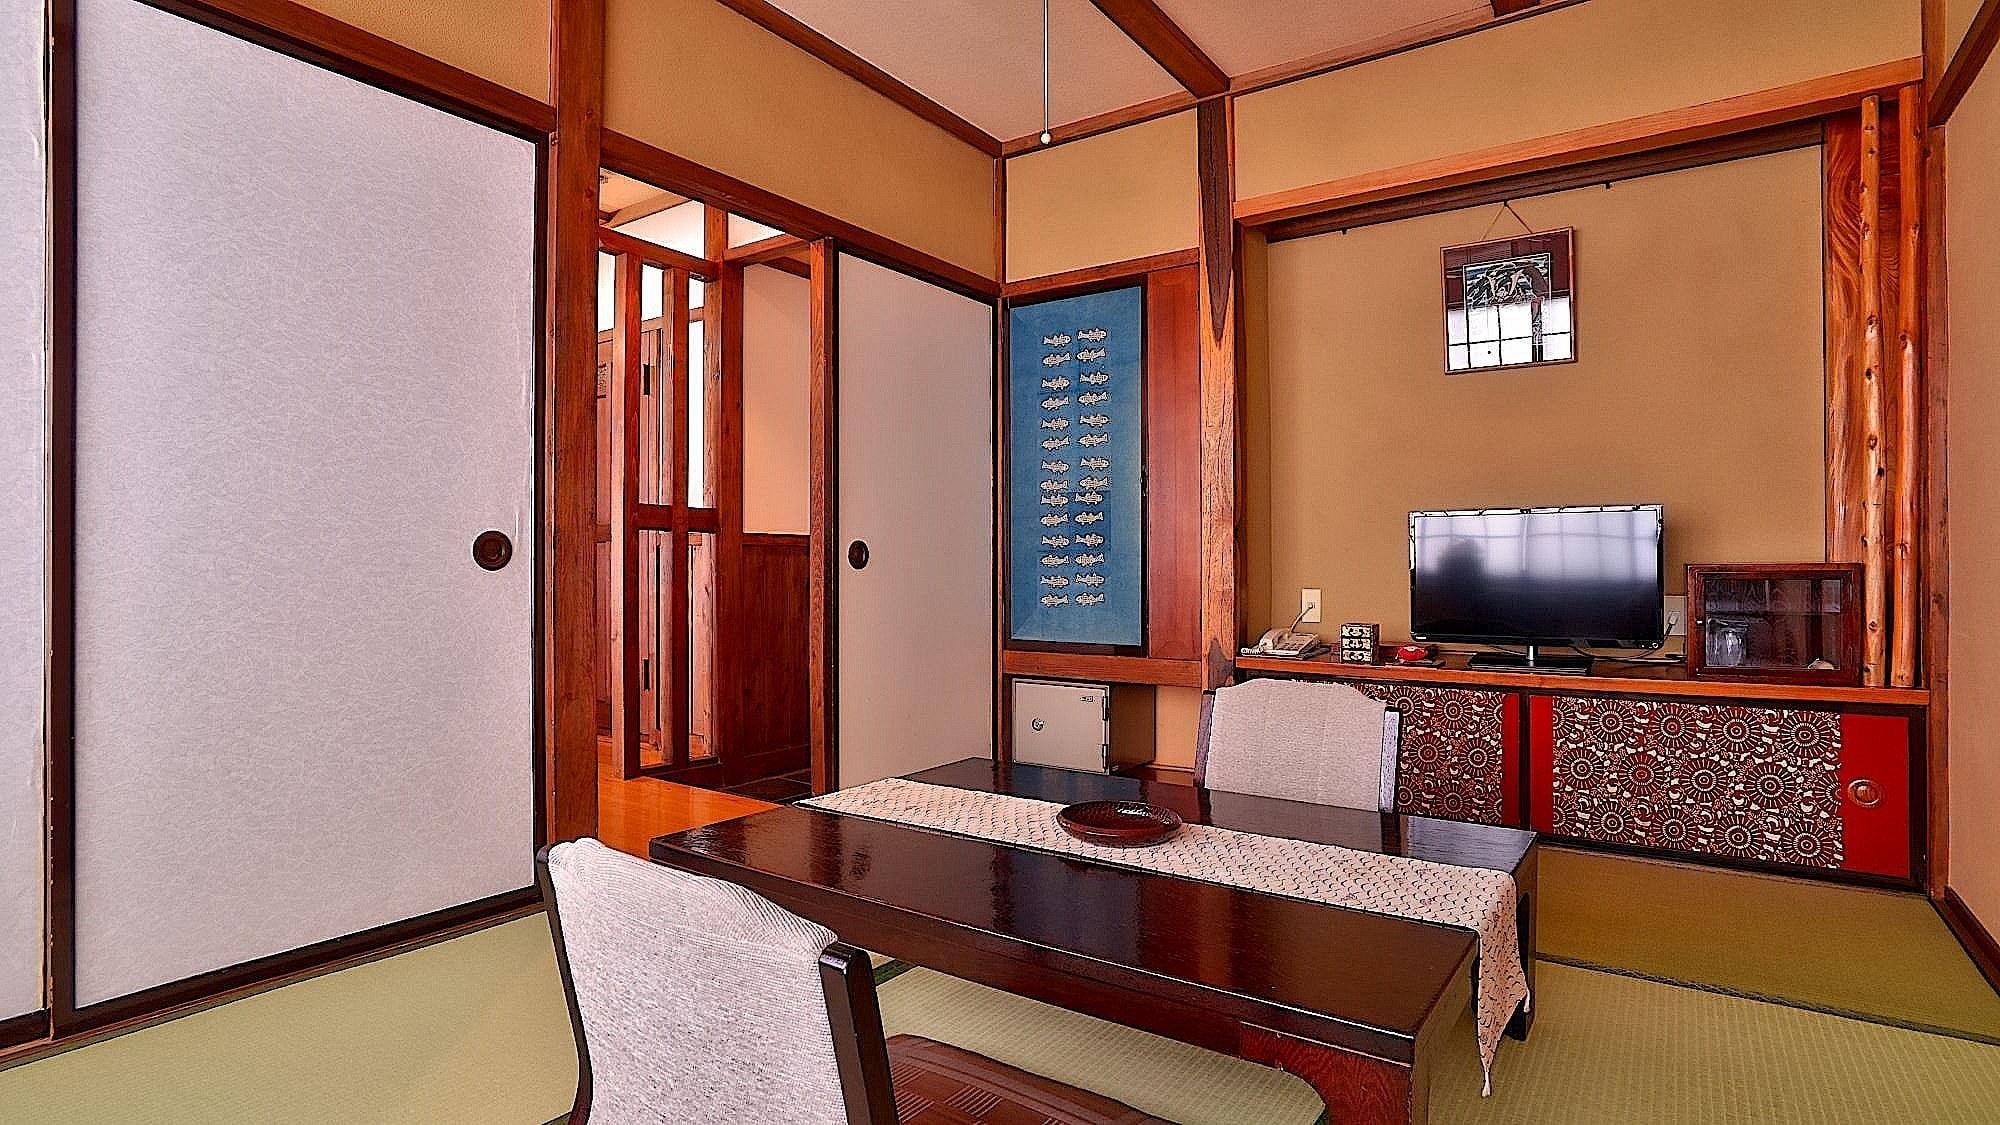 [Sourin-tei] Small room [Japanese-style room 6 tatami mats] Non-smoking, Wifi available